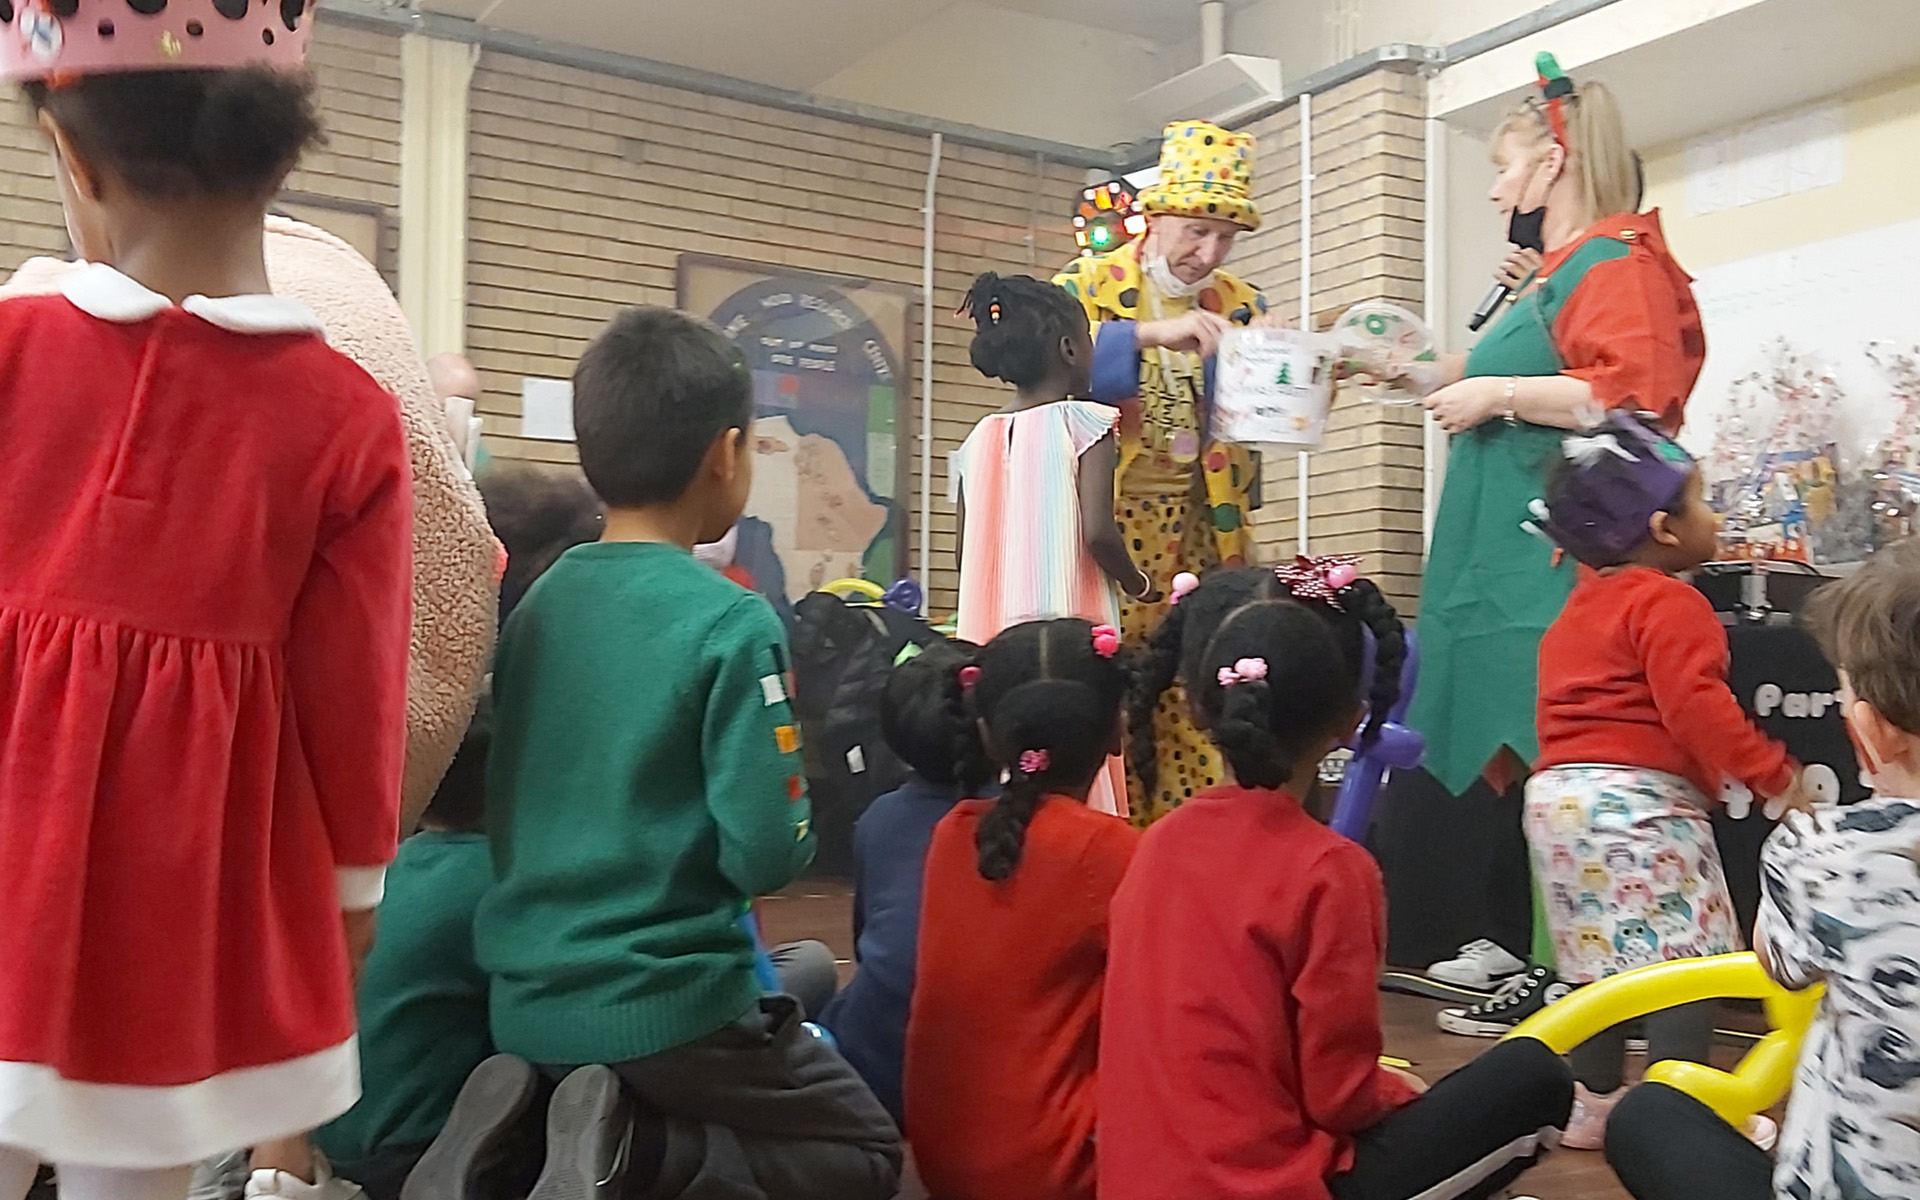 Children watching a clown perform a prize draw at a Christmas party.